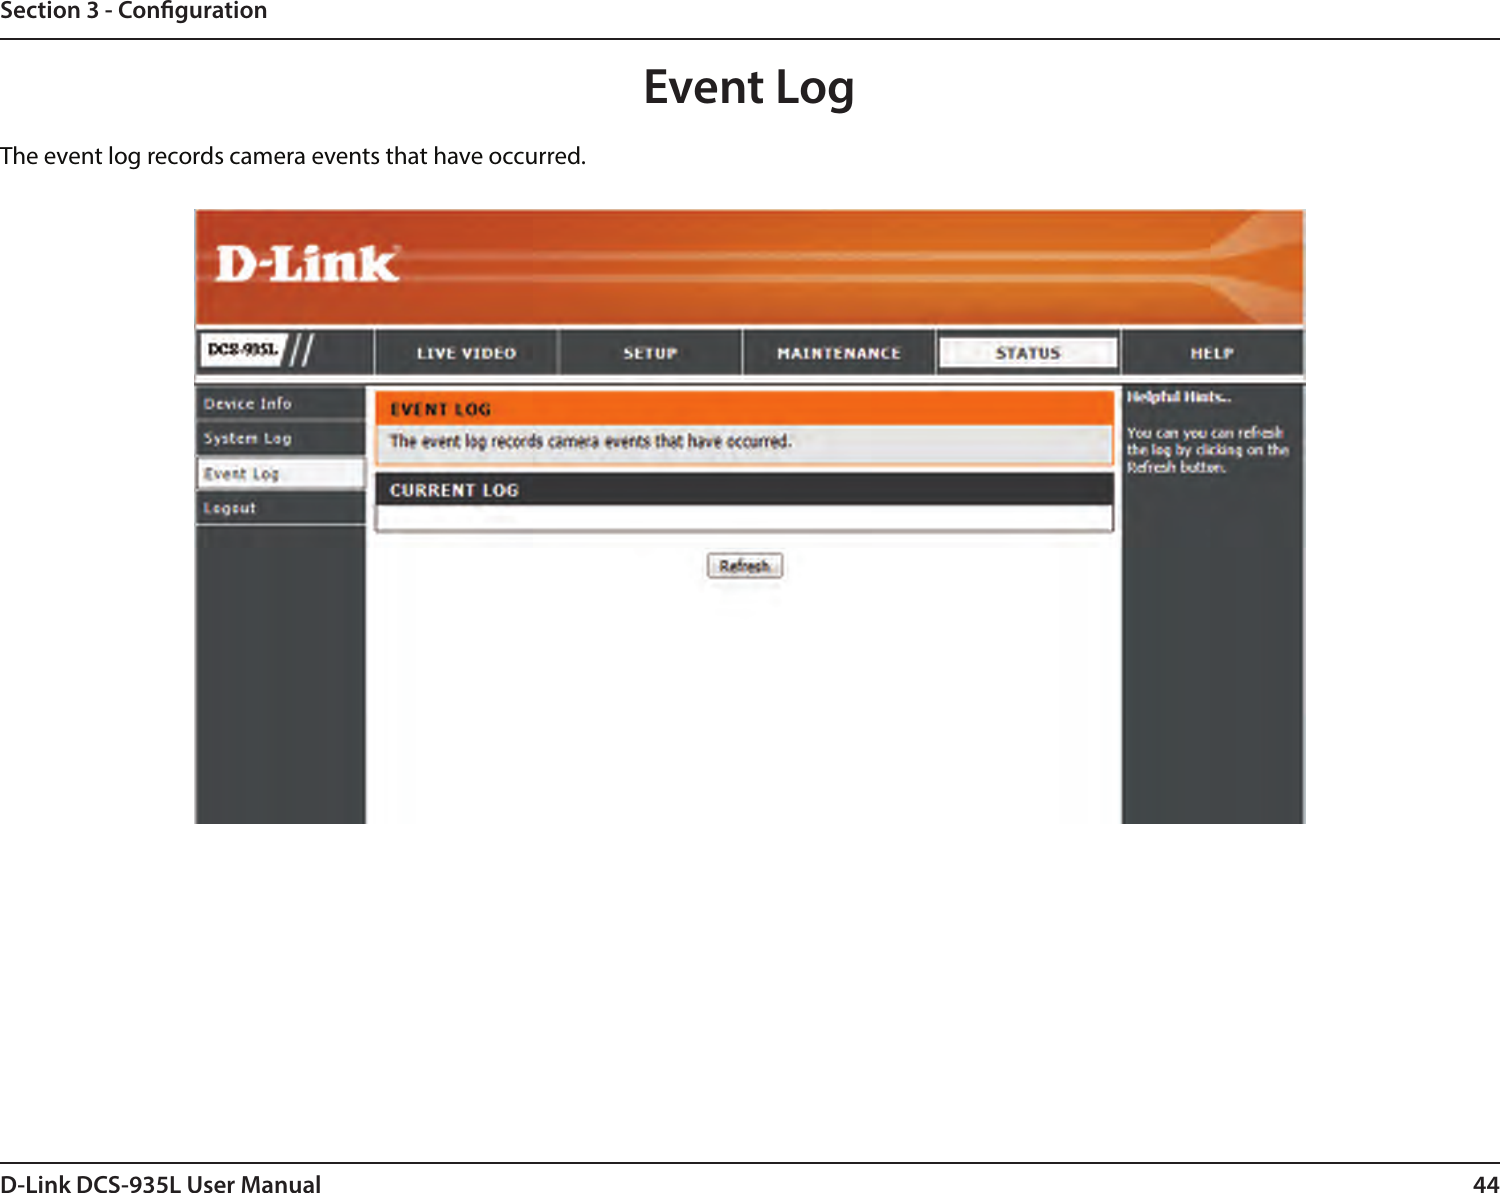 44D-Link DCS-935L User ManualSection 3 - CongurationEvent LogThe event log records camera events that have occurred.